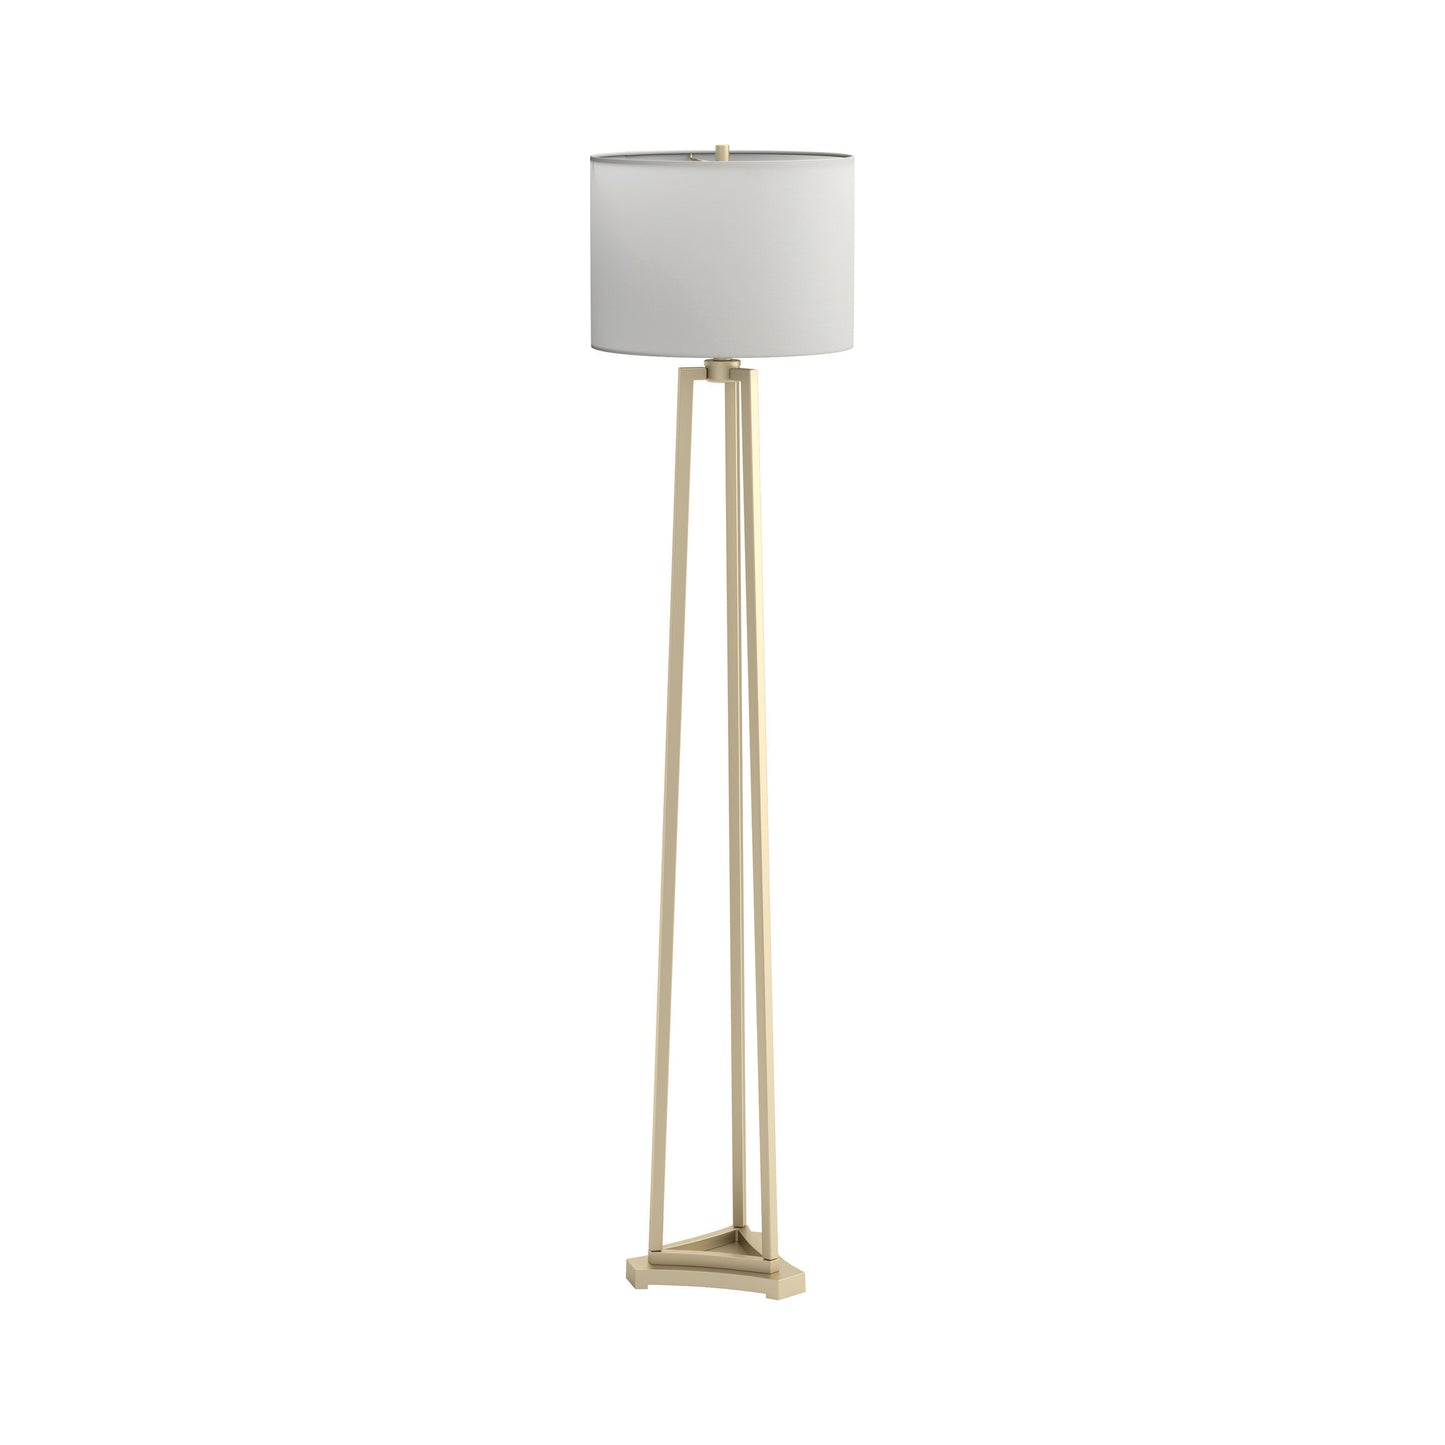 Drum Shade Floor Lamp White And Gold - 920130